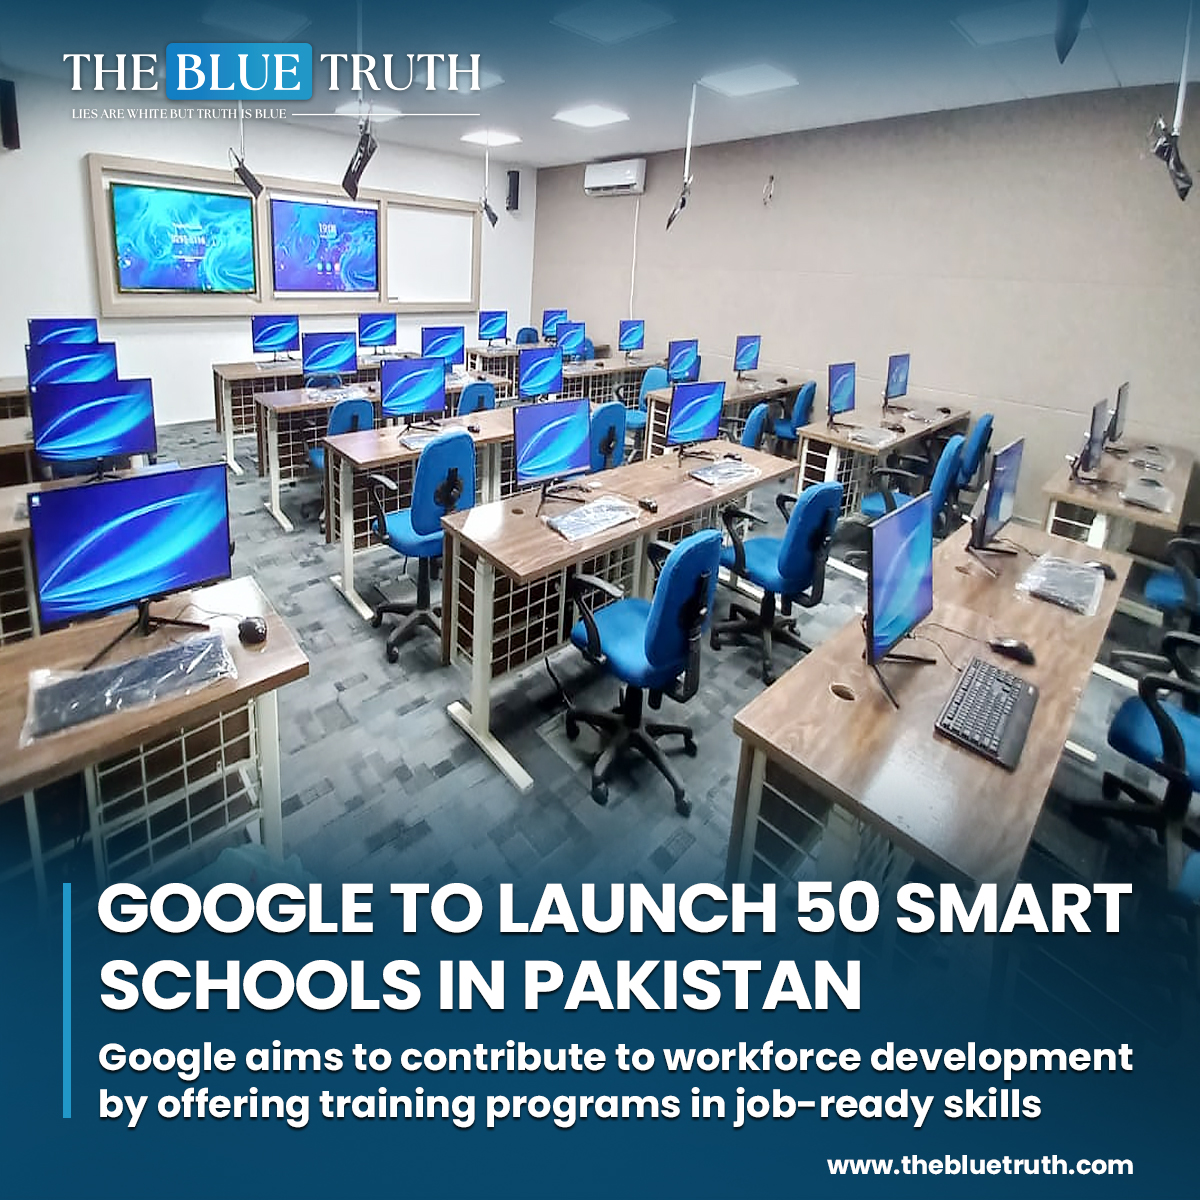 Google is also exploring the possibility of hosting an Edutech event in collaboration with the education ministry in Pakistan. 
#Google #TechValley #SmartSchools #EducationRevolution #tbt #TheBlueTruth